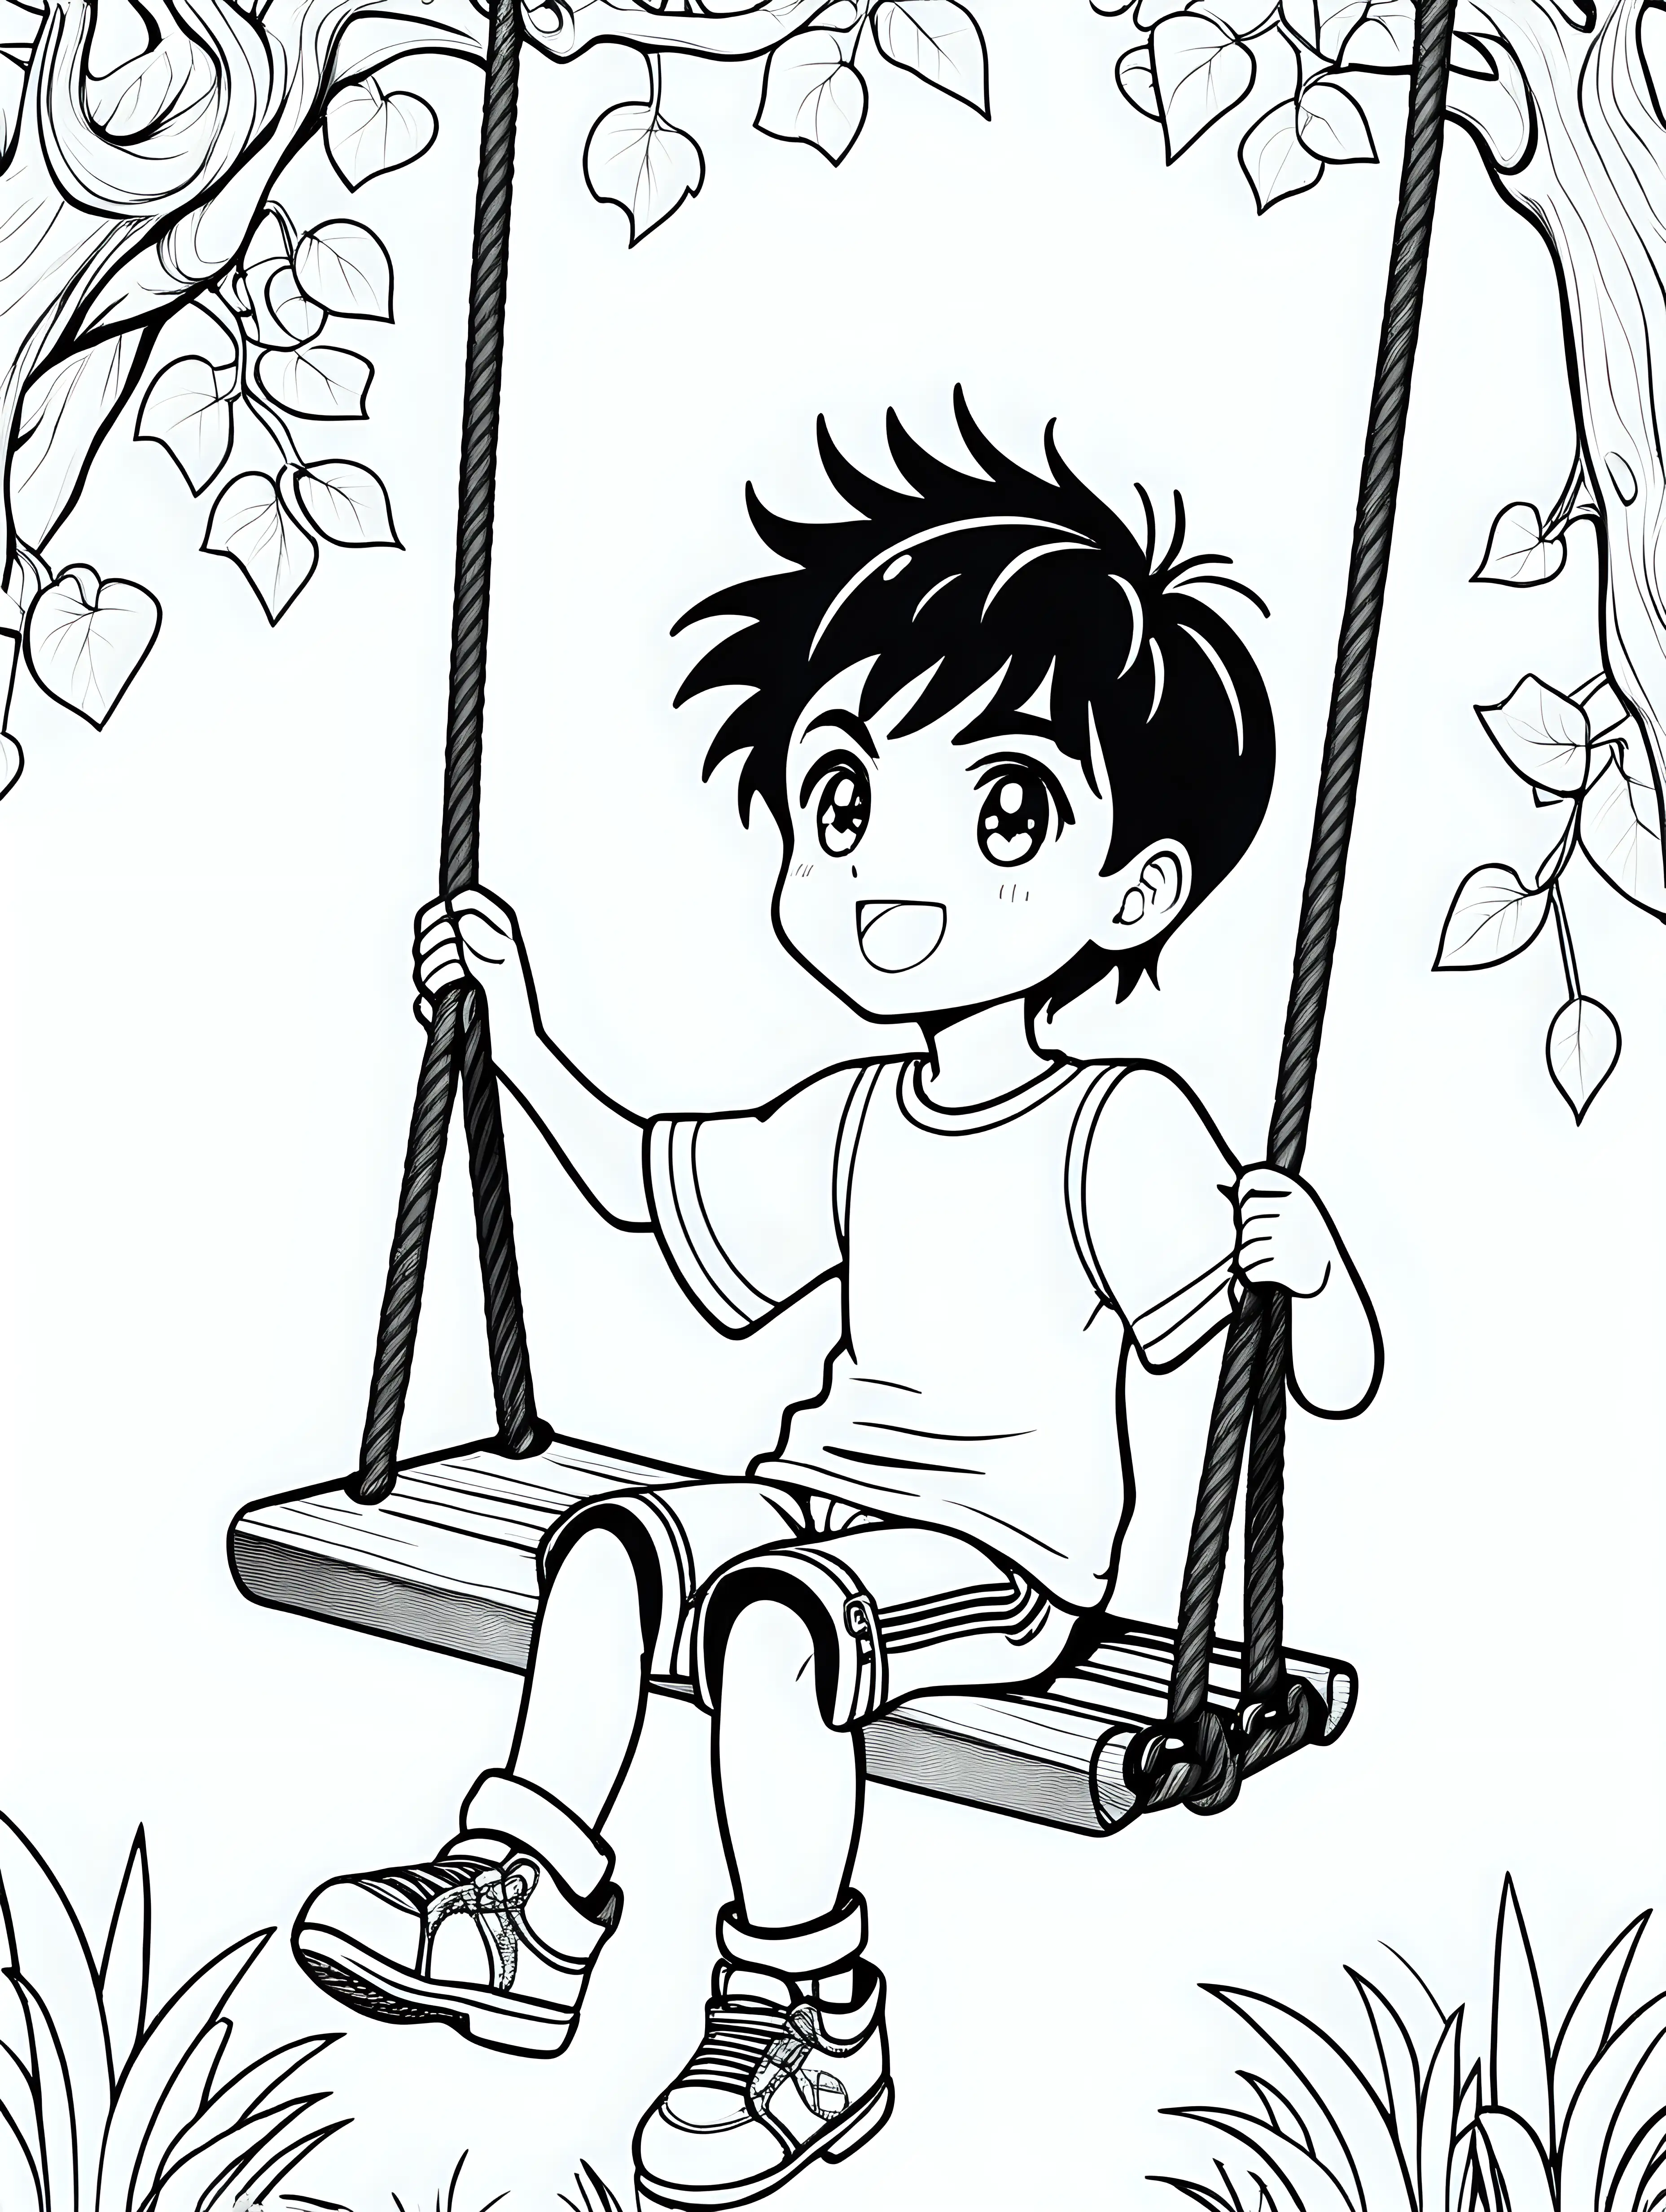 Coloring page for kids, cute manga child boy, the boy is on a swing, black lines white background 